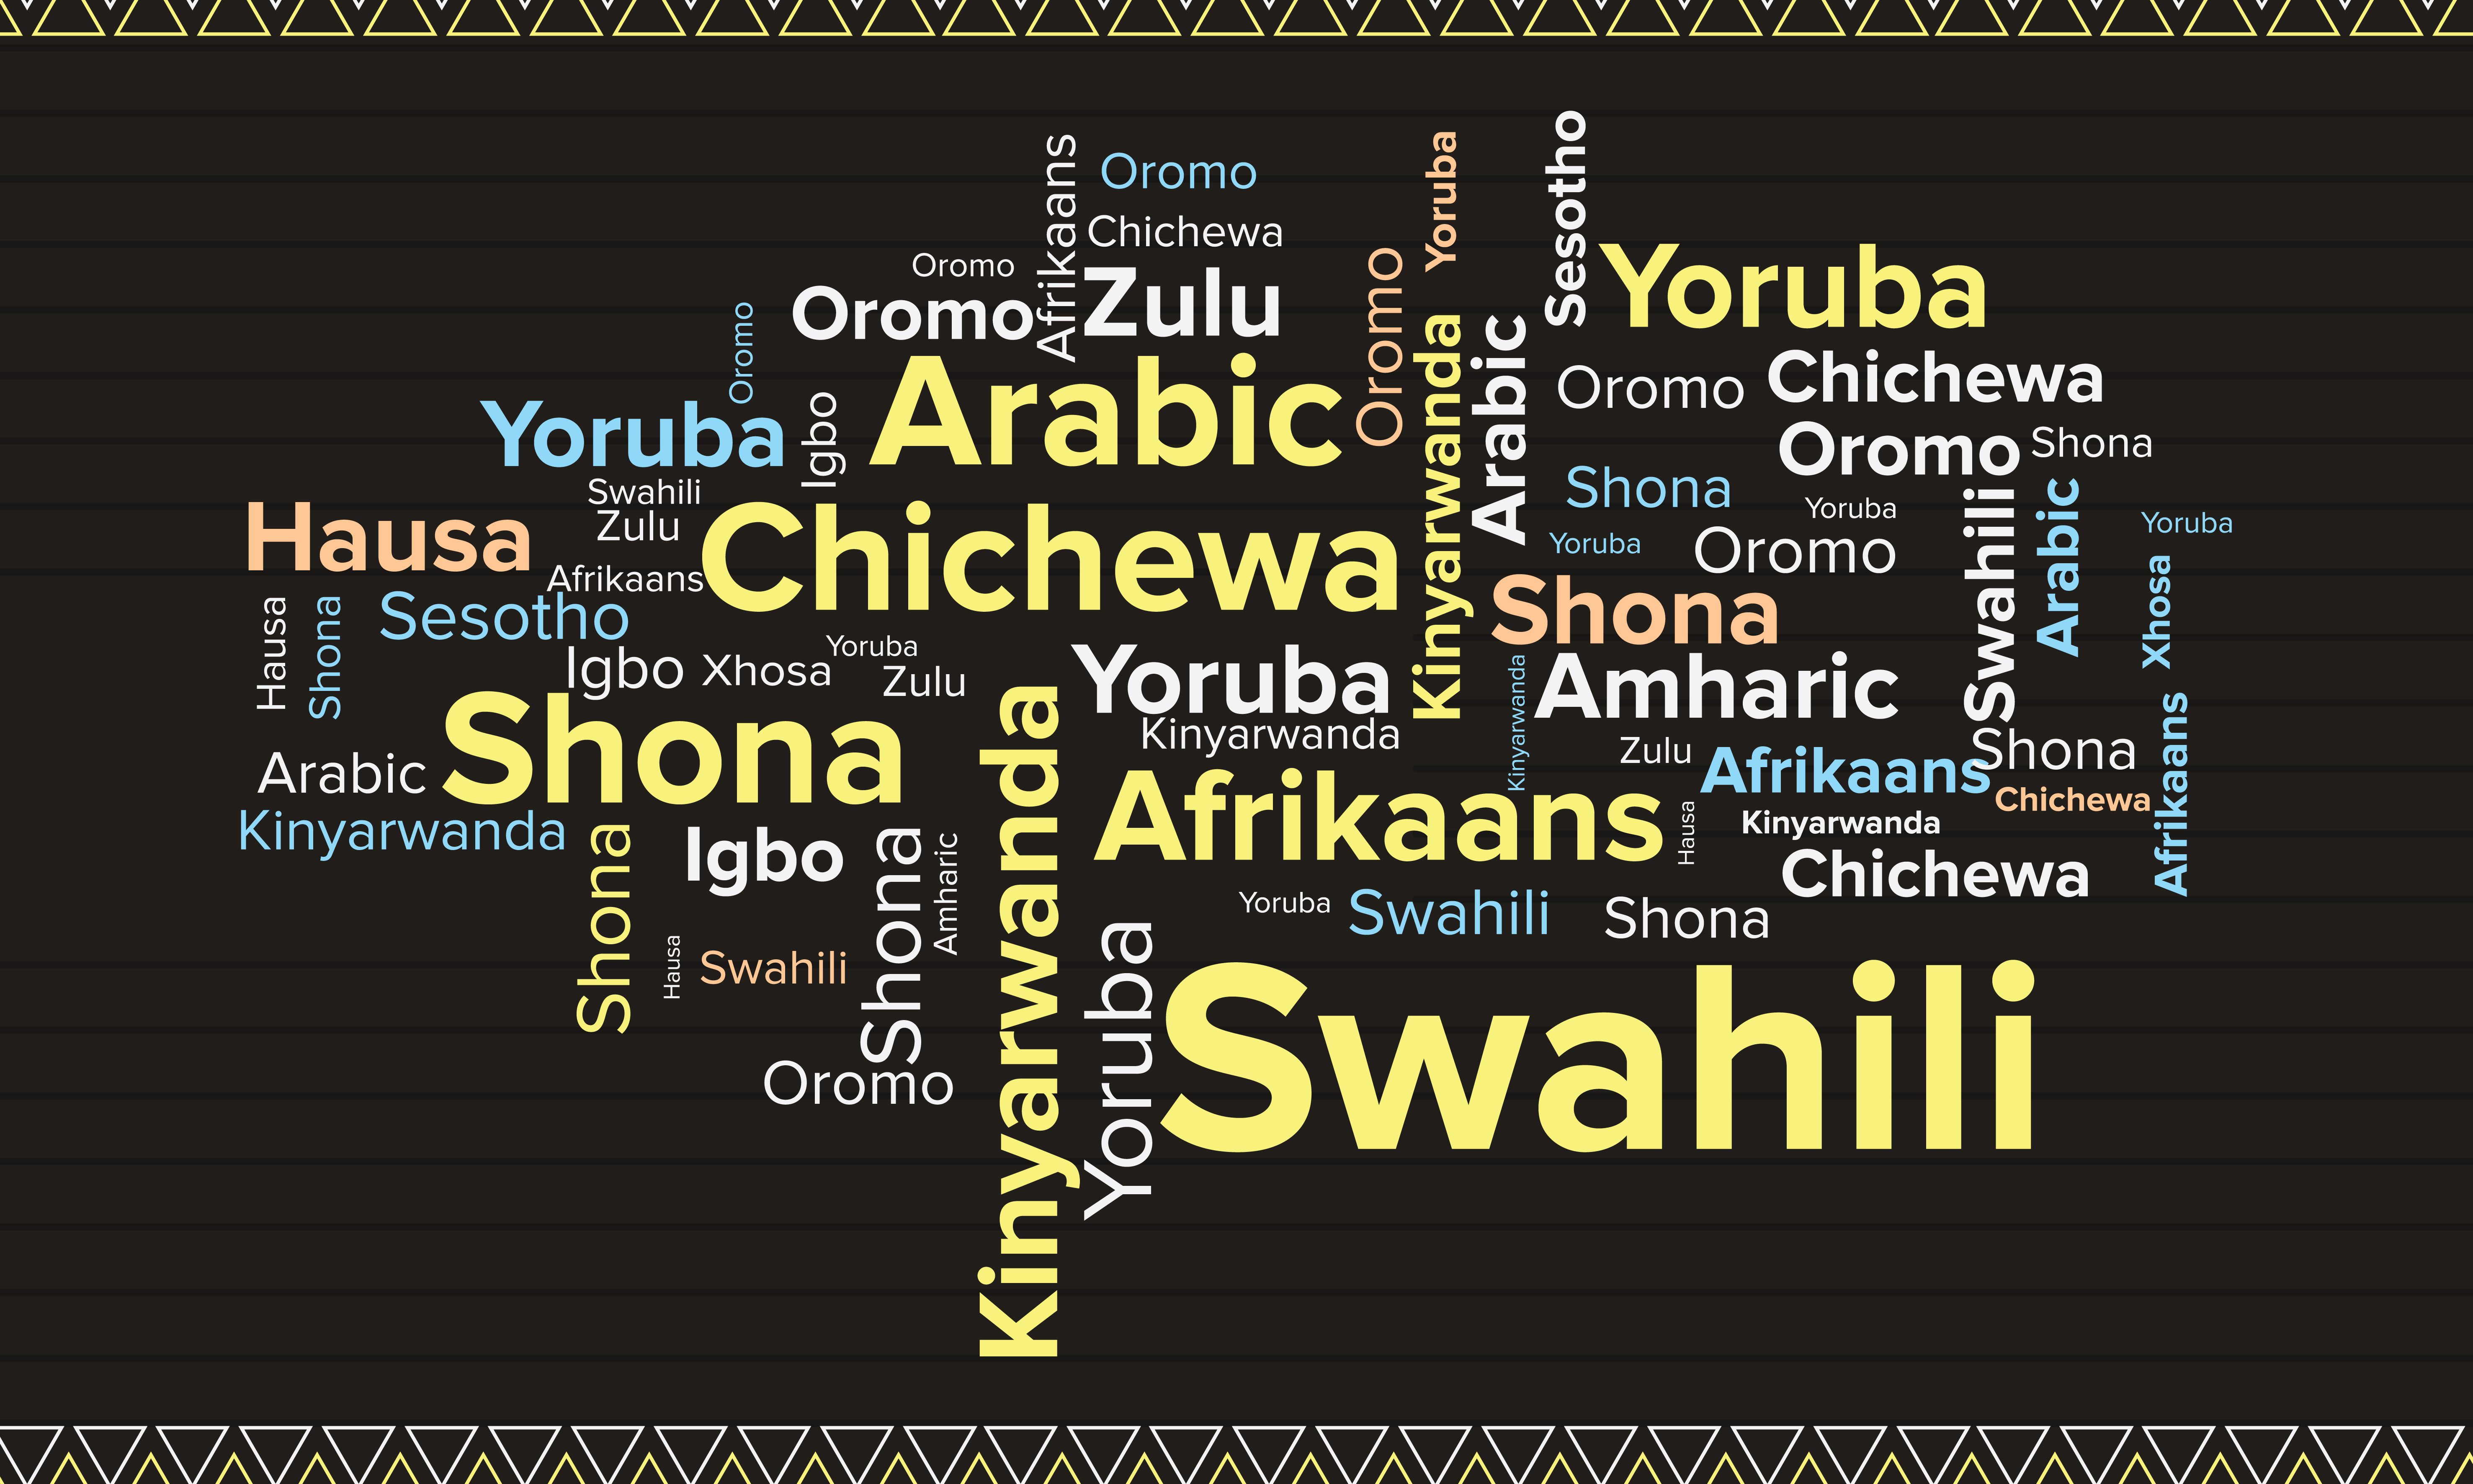 9 New African Languages Added to Google Translate Offline Support